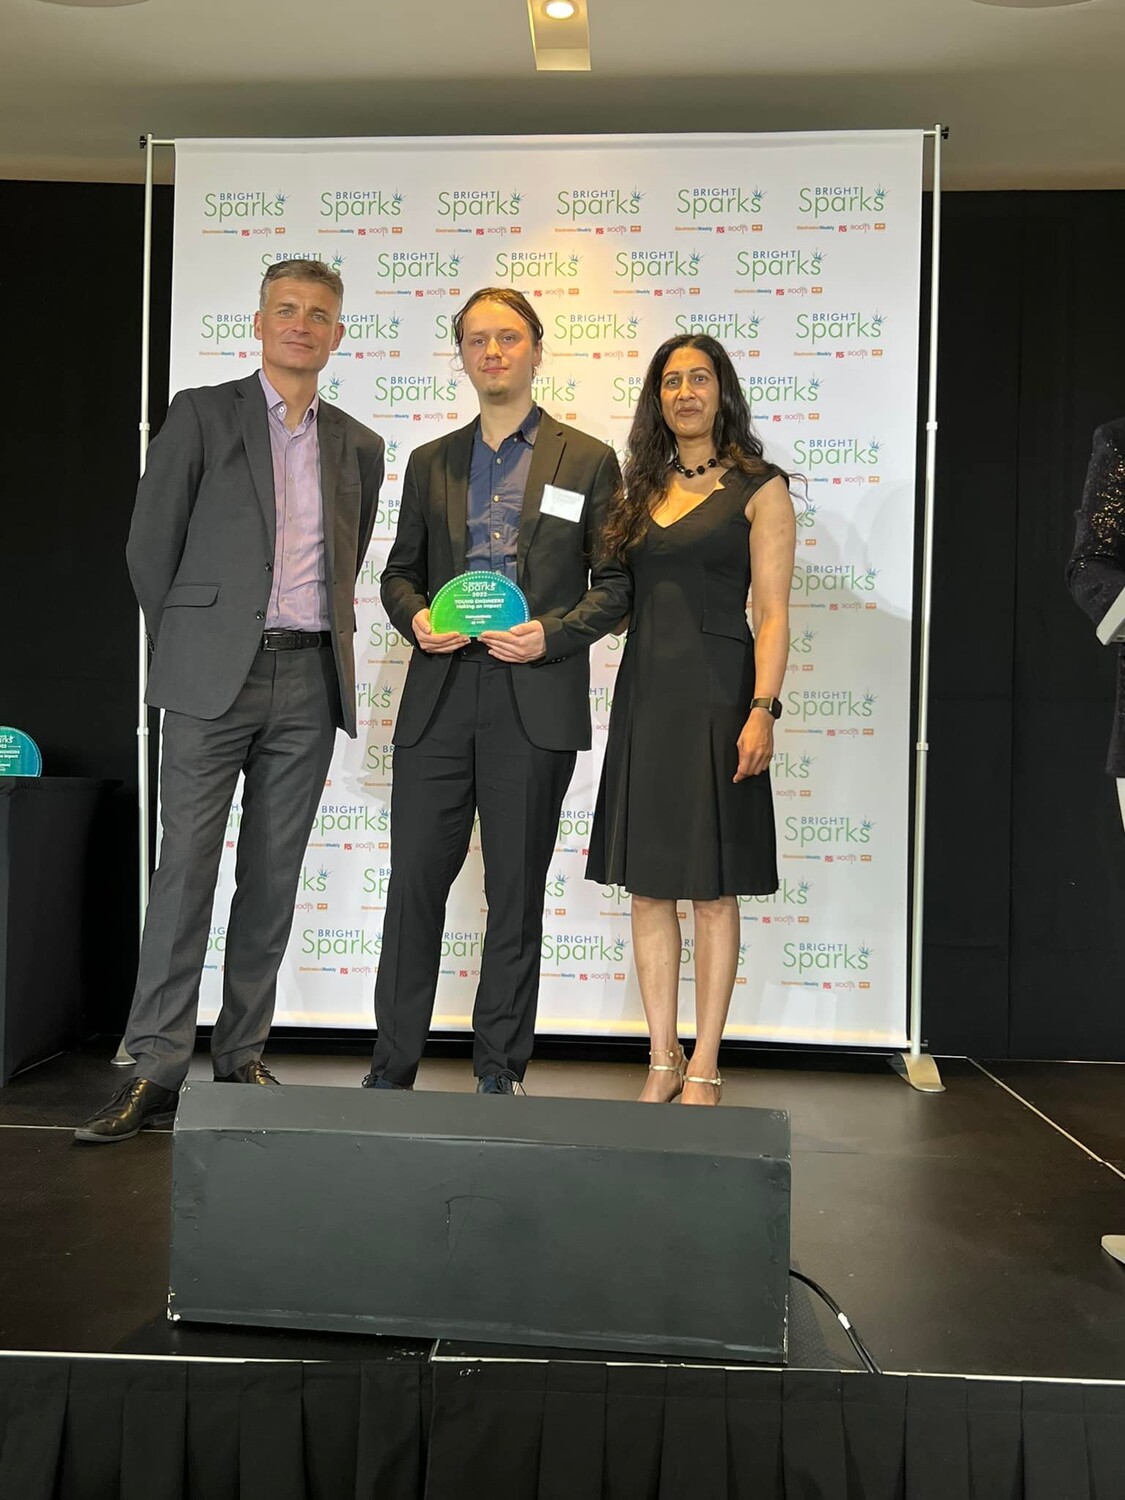 Arthur collecting his award with Richard Watts and Isabella Mascarenhas photo by Robbie Dunion